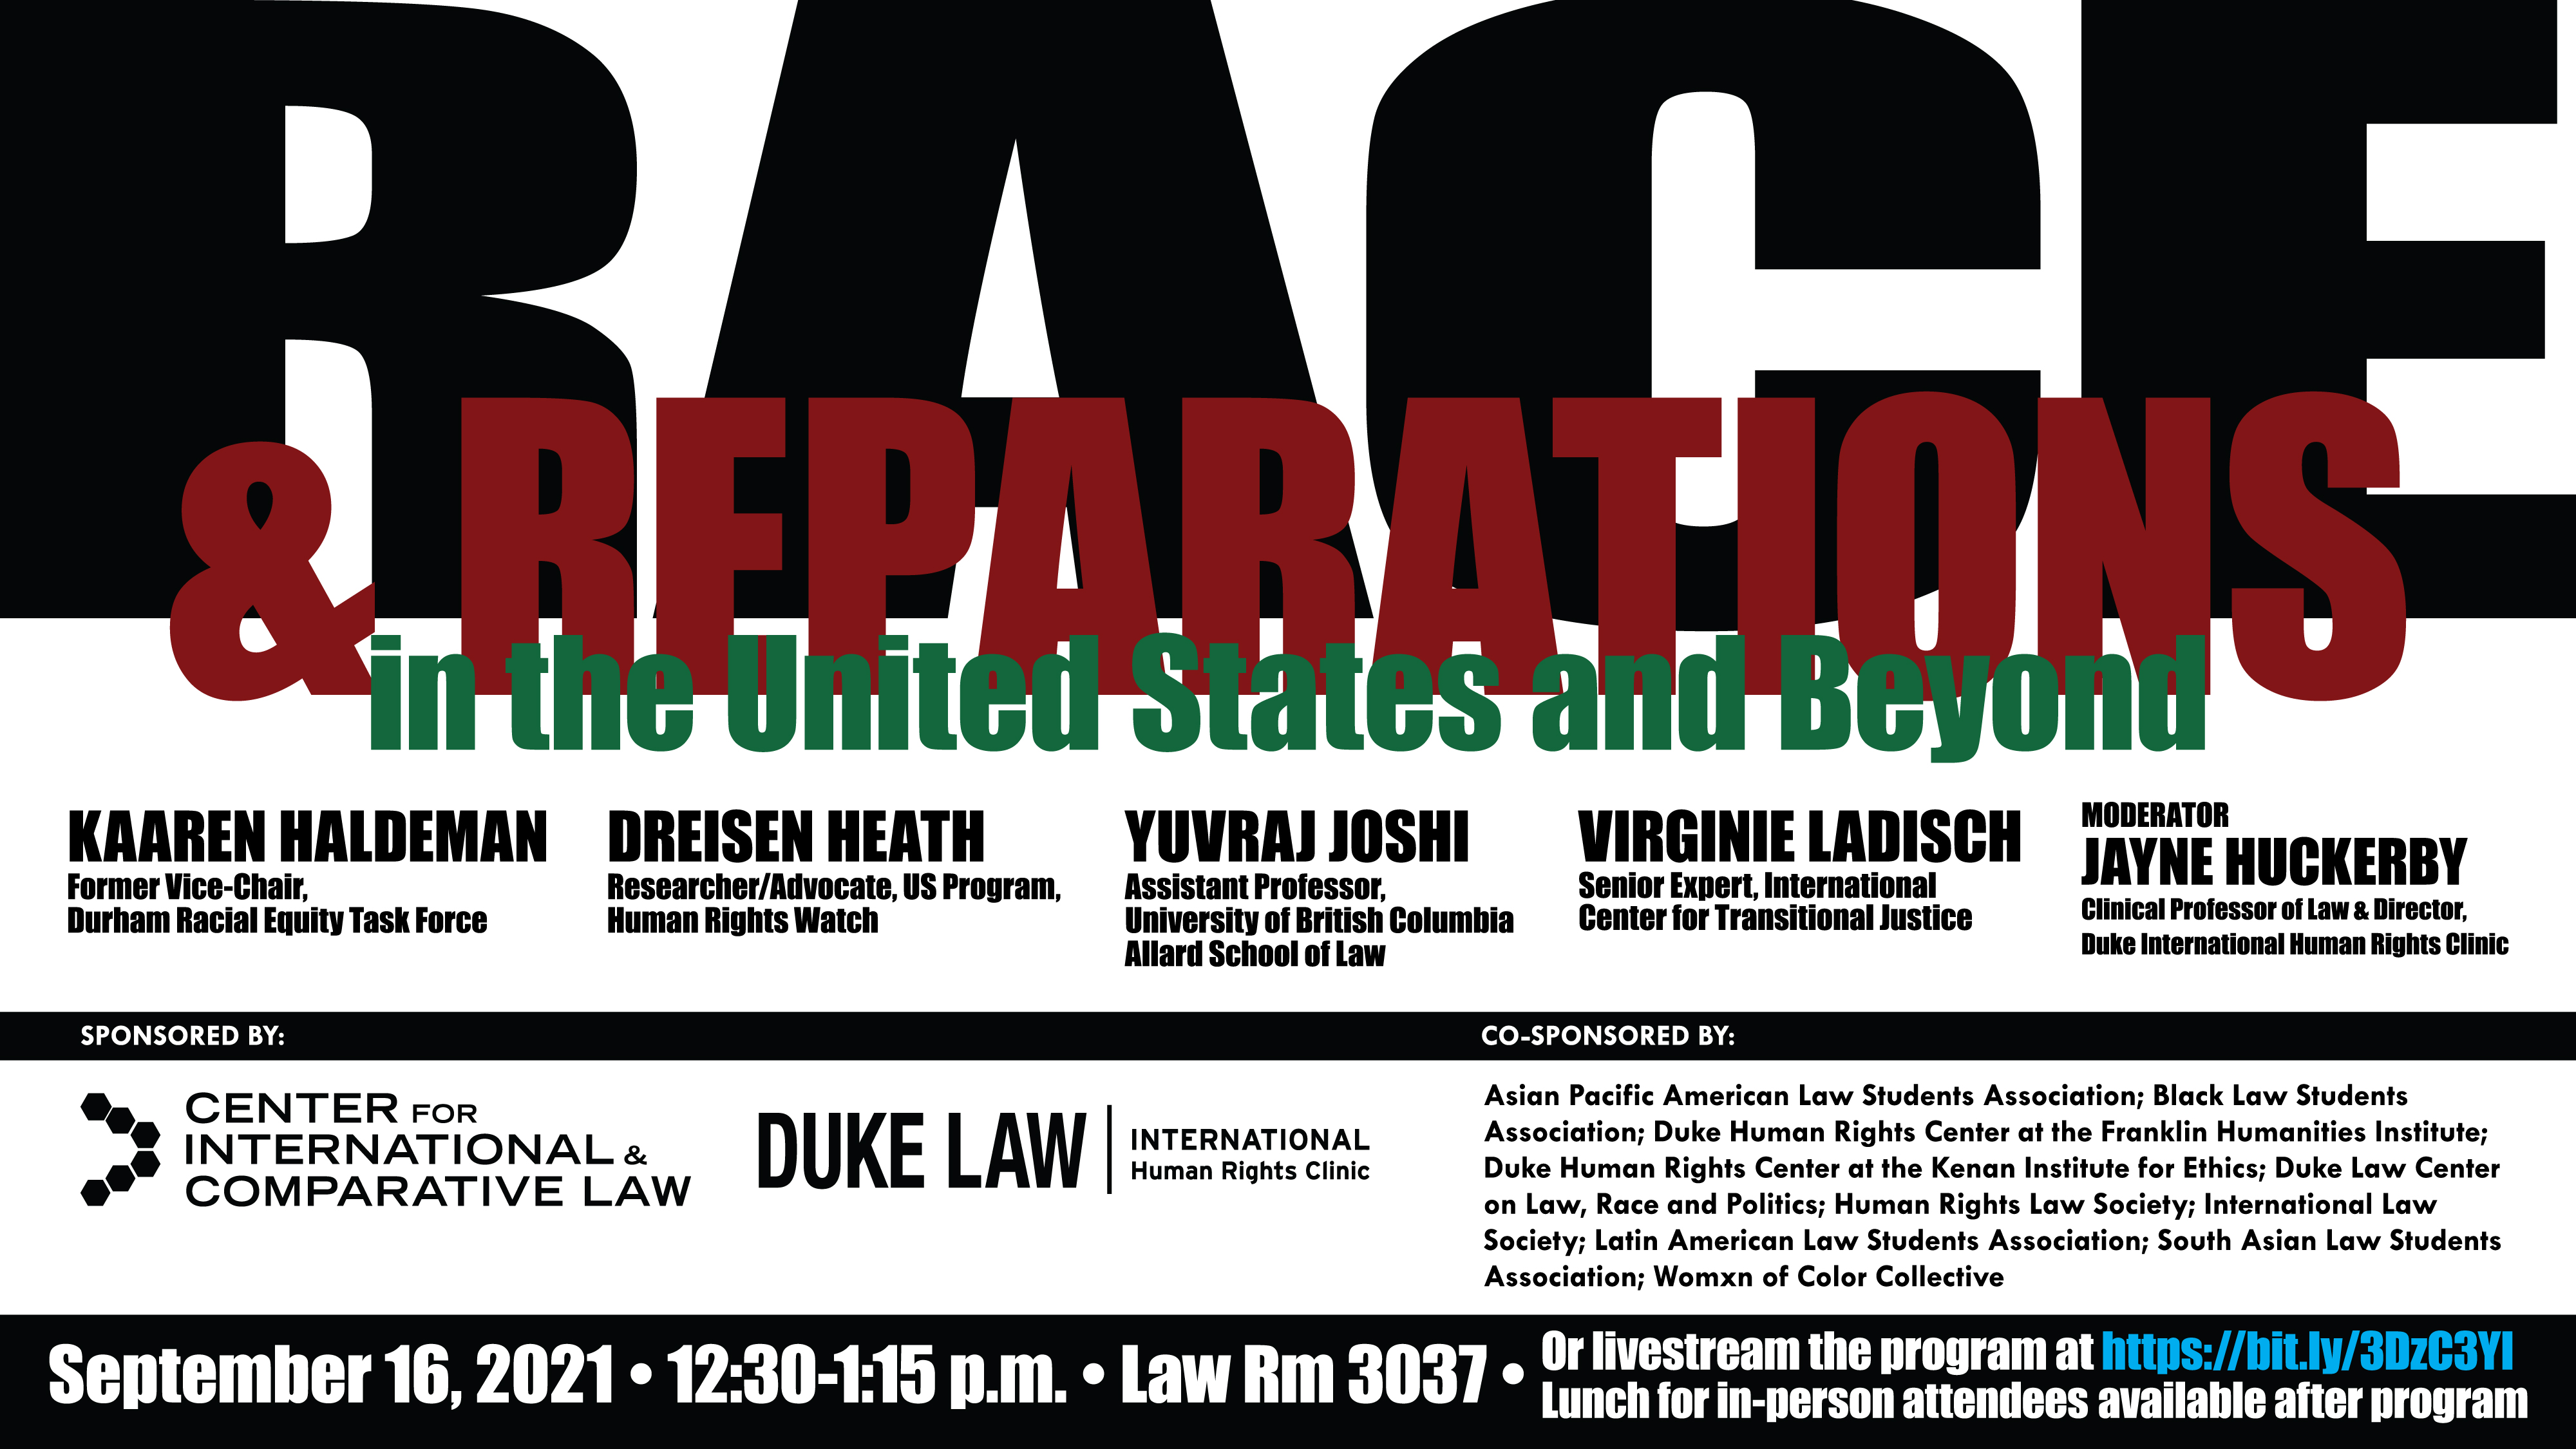 Race & Reparations in the United States and Beyond 